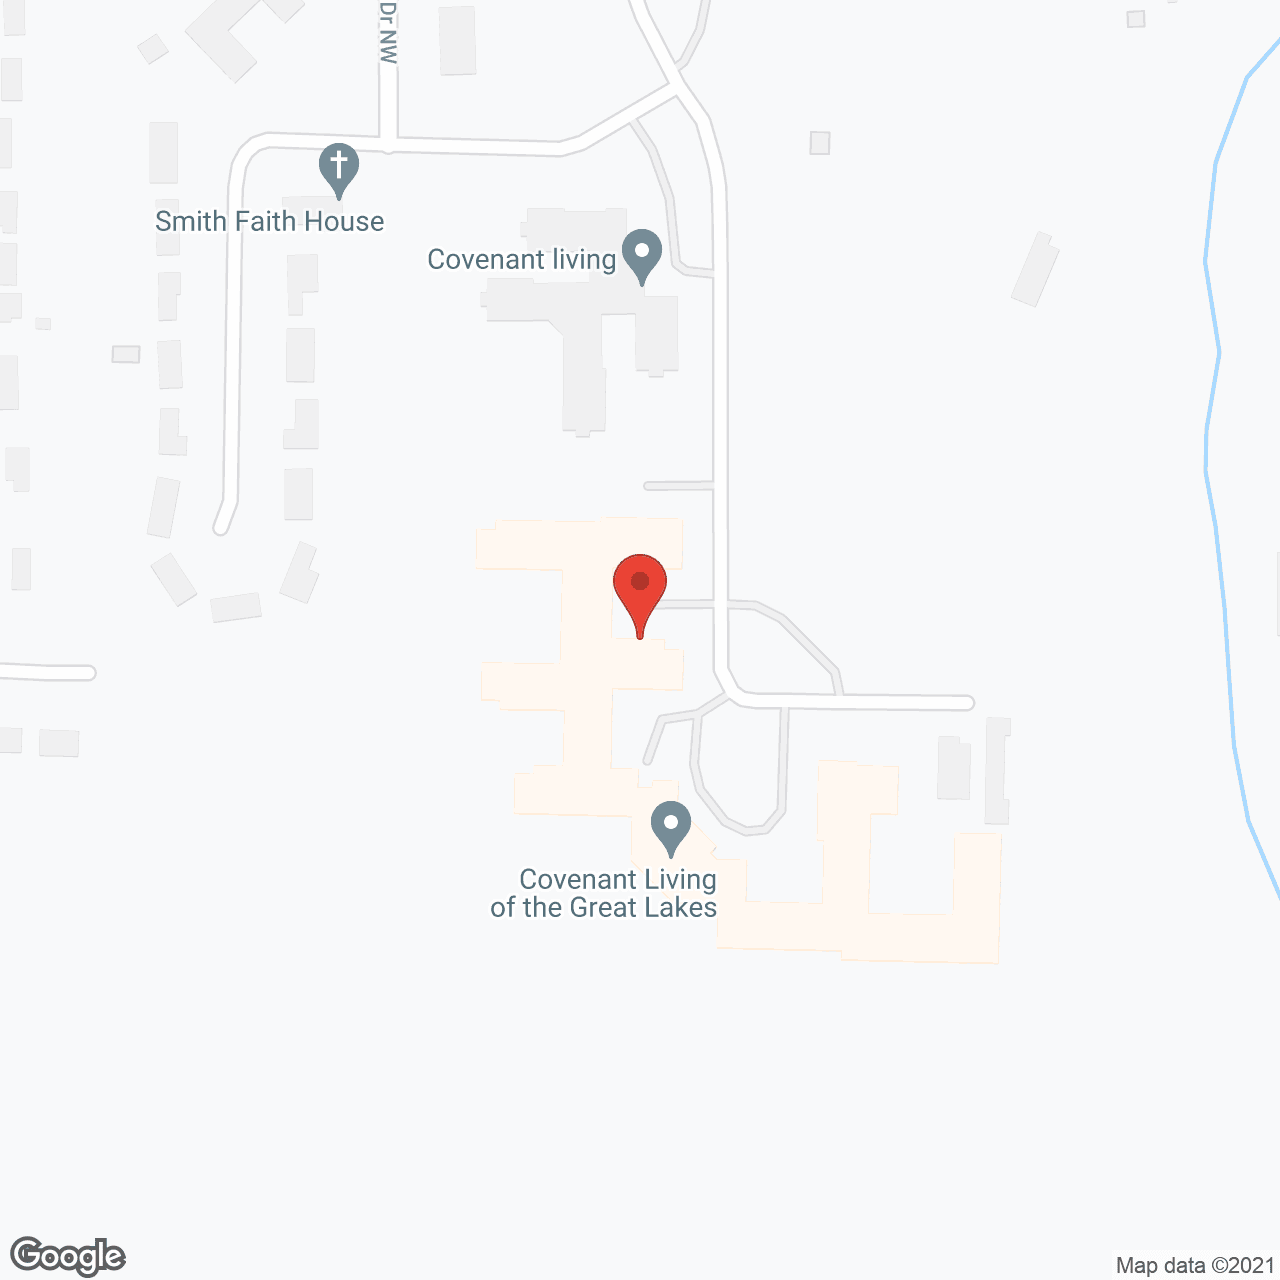 Covenant Village of the Great Lakes in google map